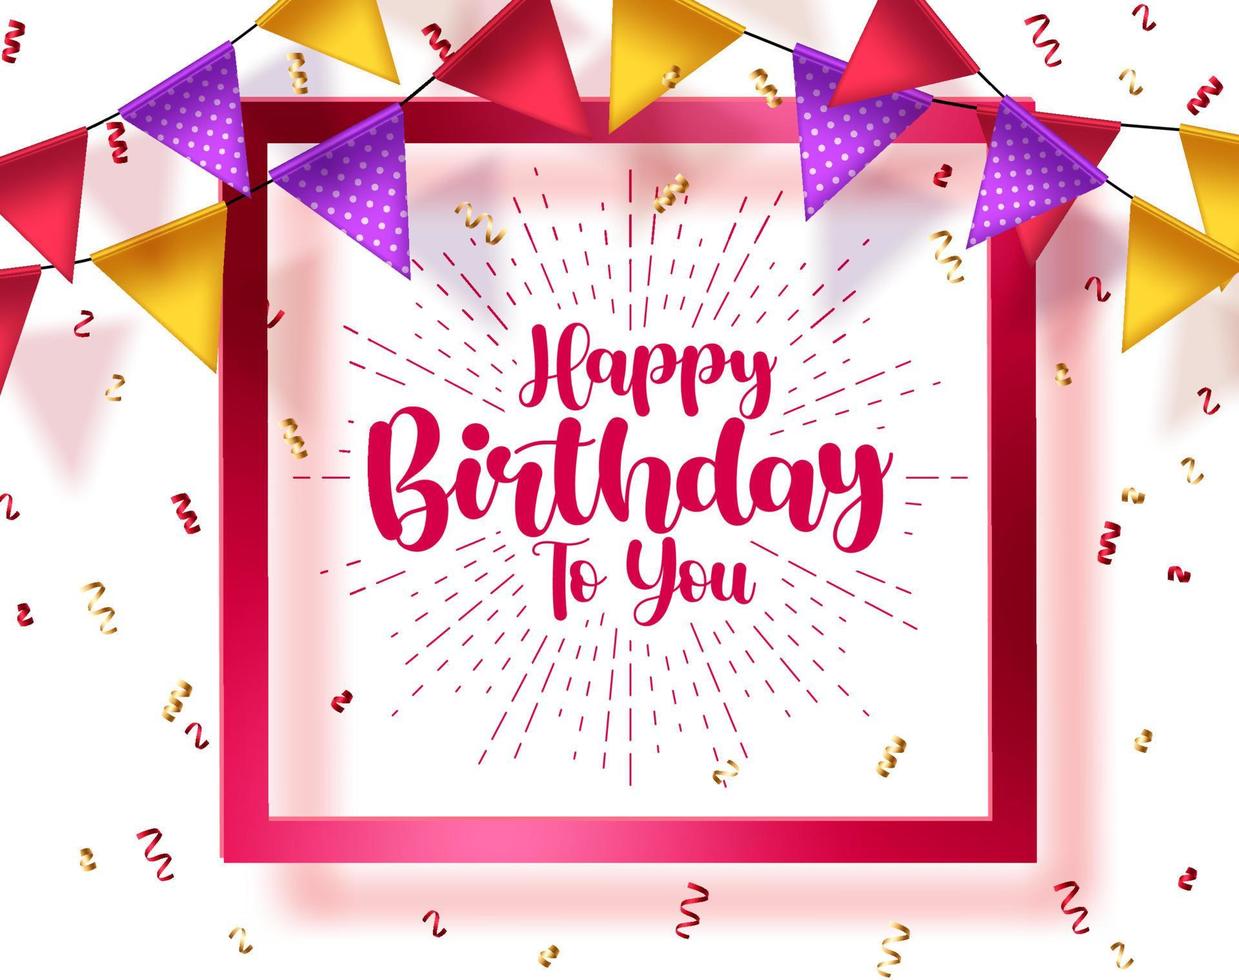 Happy birthday vector template design. Birthday greeting text in red frame space with streamer elements for party celebration and invitation card in white background. Vector illustration.